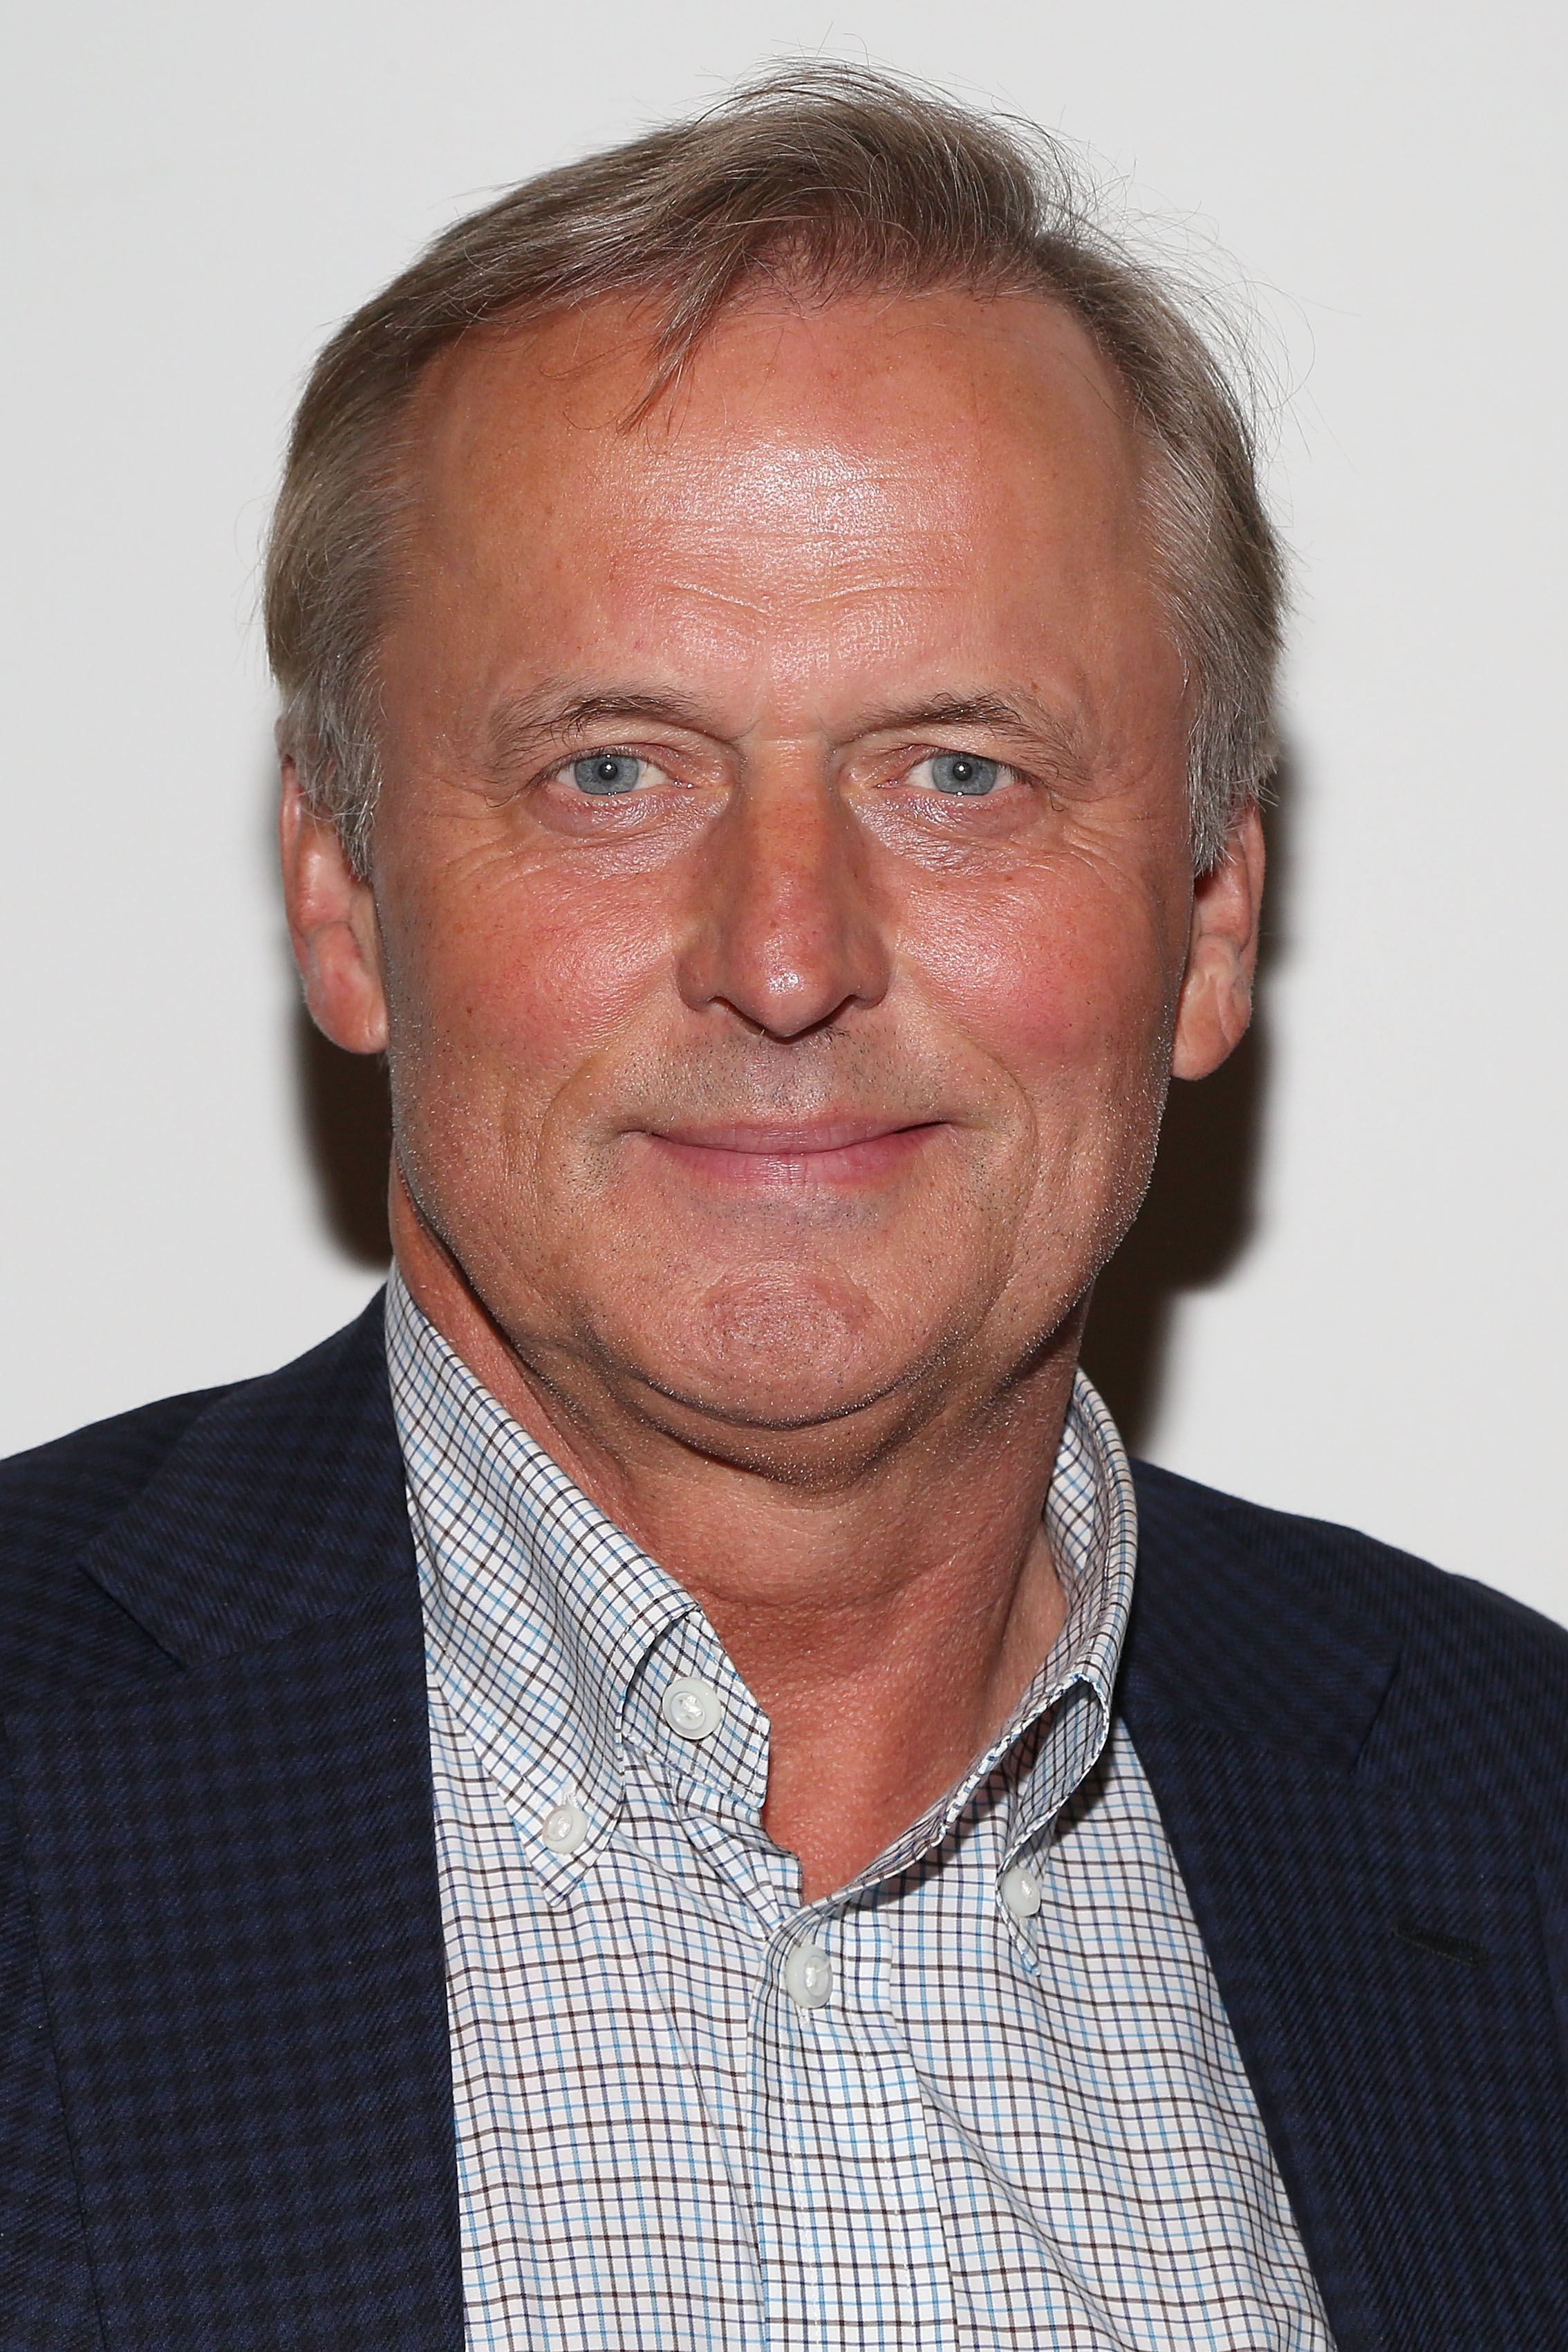 Author John Grisham attends the 2014 Bookexpo America at The Jacob K. Javits Convention Center on May 31, 2014 in New York City. (Taylor Hill&mdash;Getty Images)